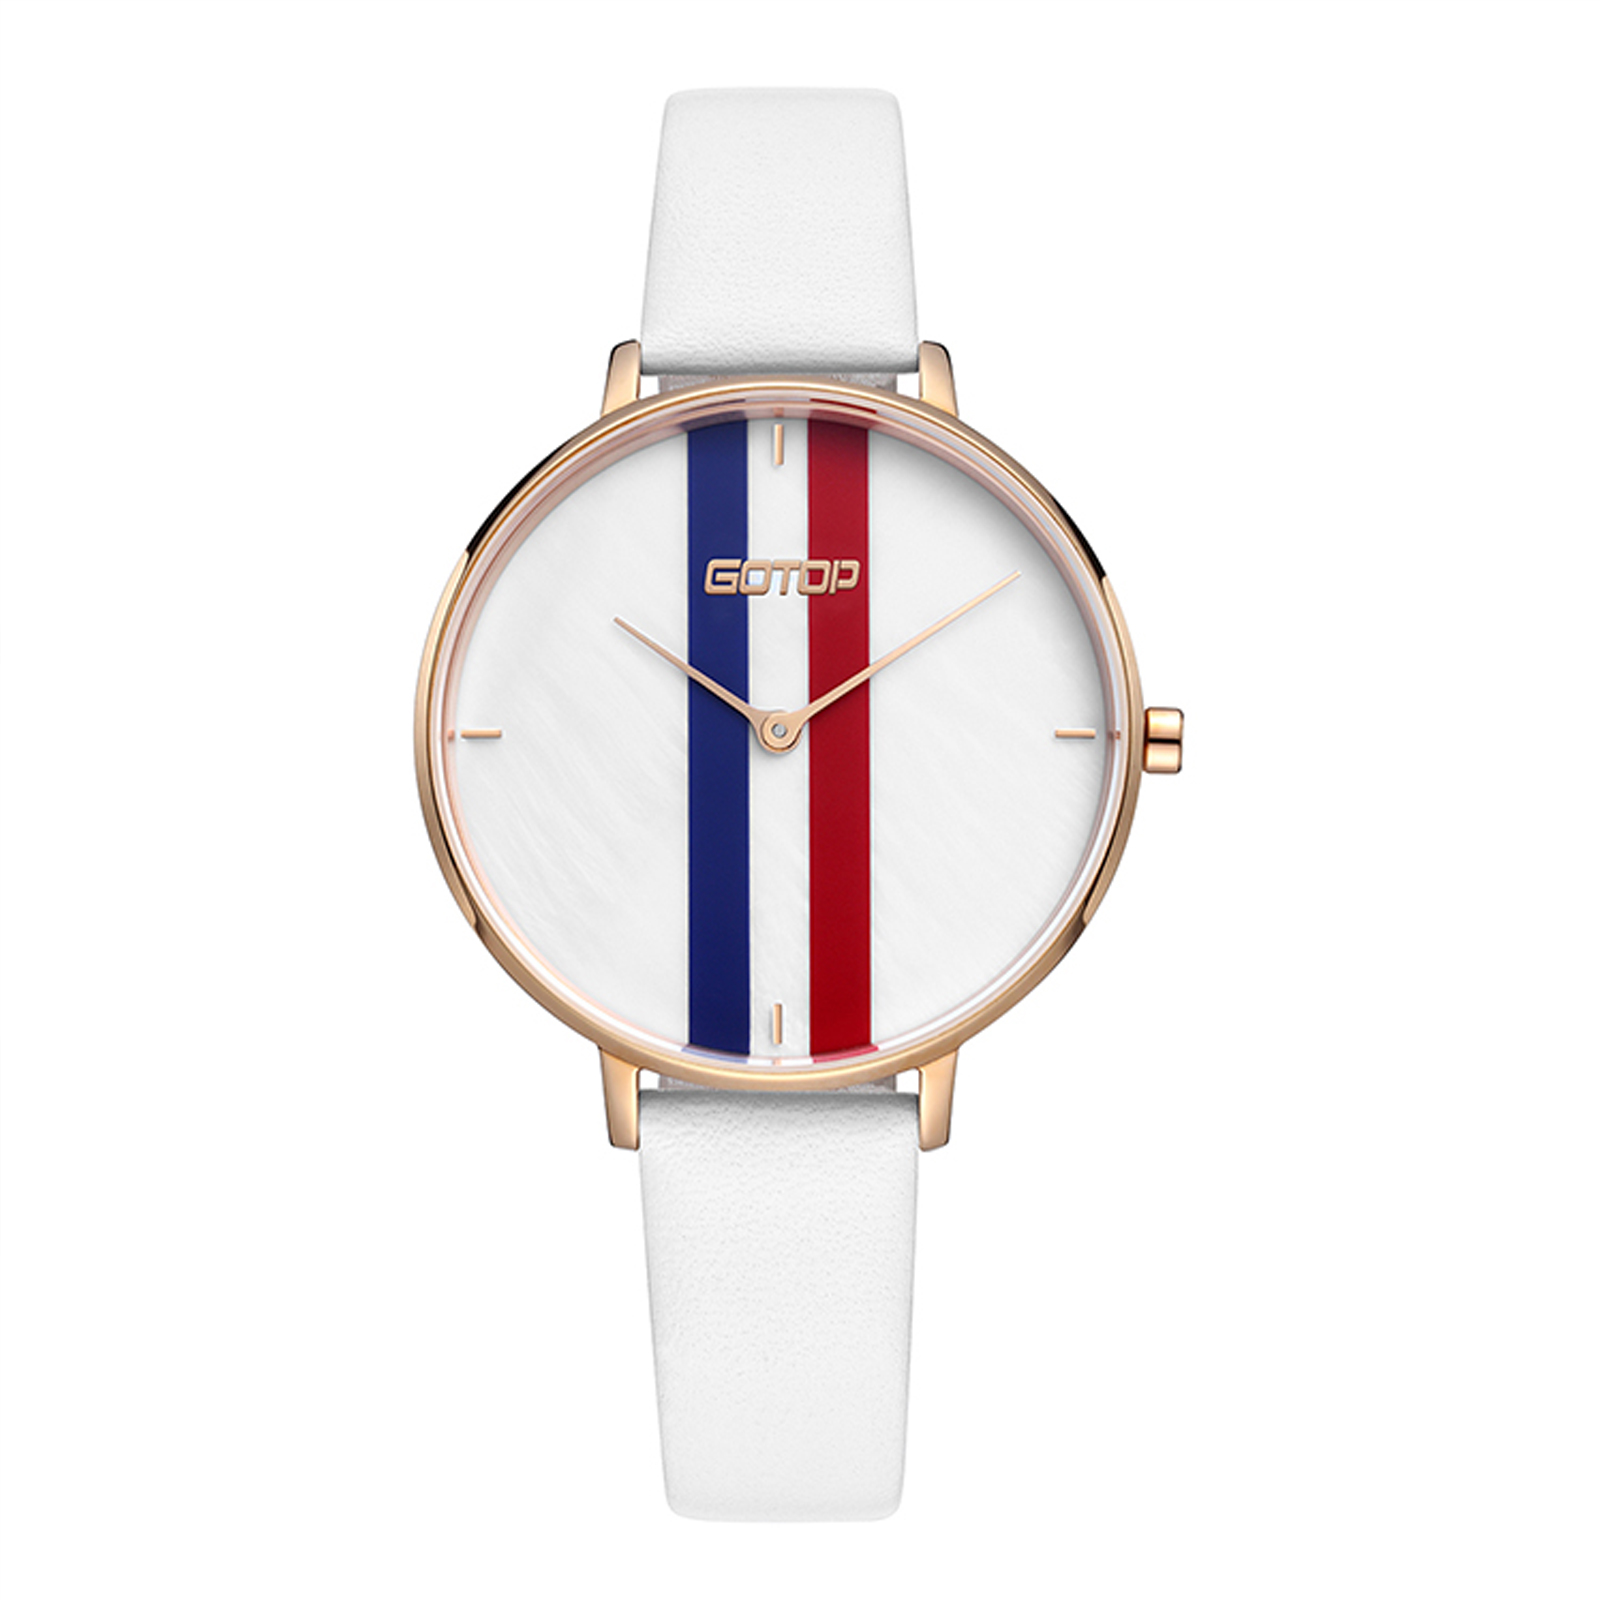 White Women's Watch With Leather Strap And Stripe Detail